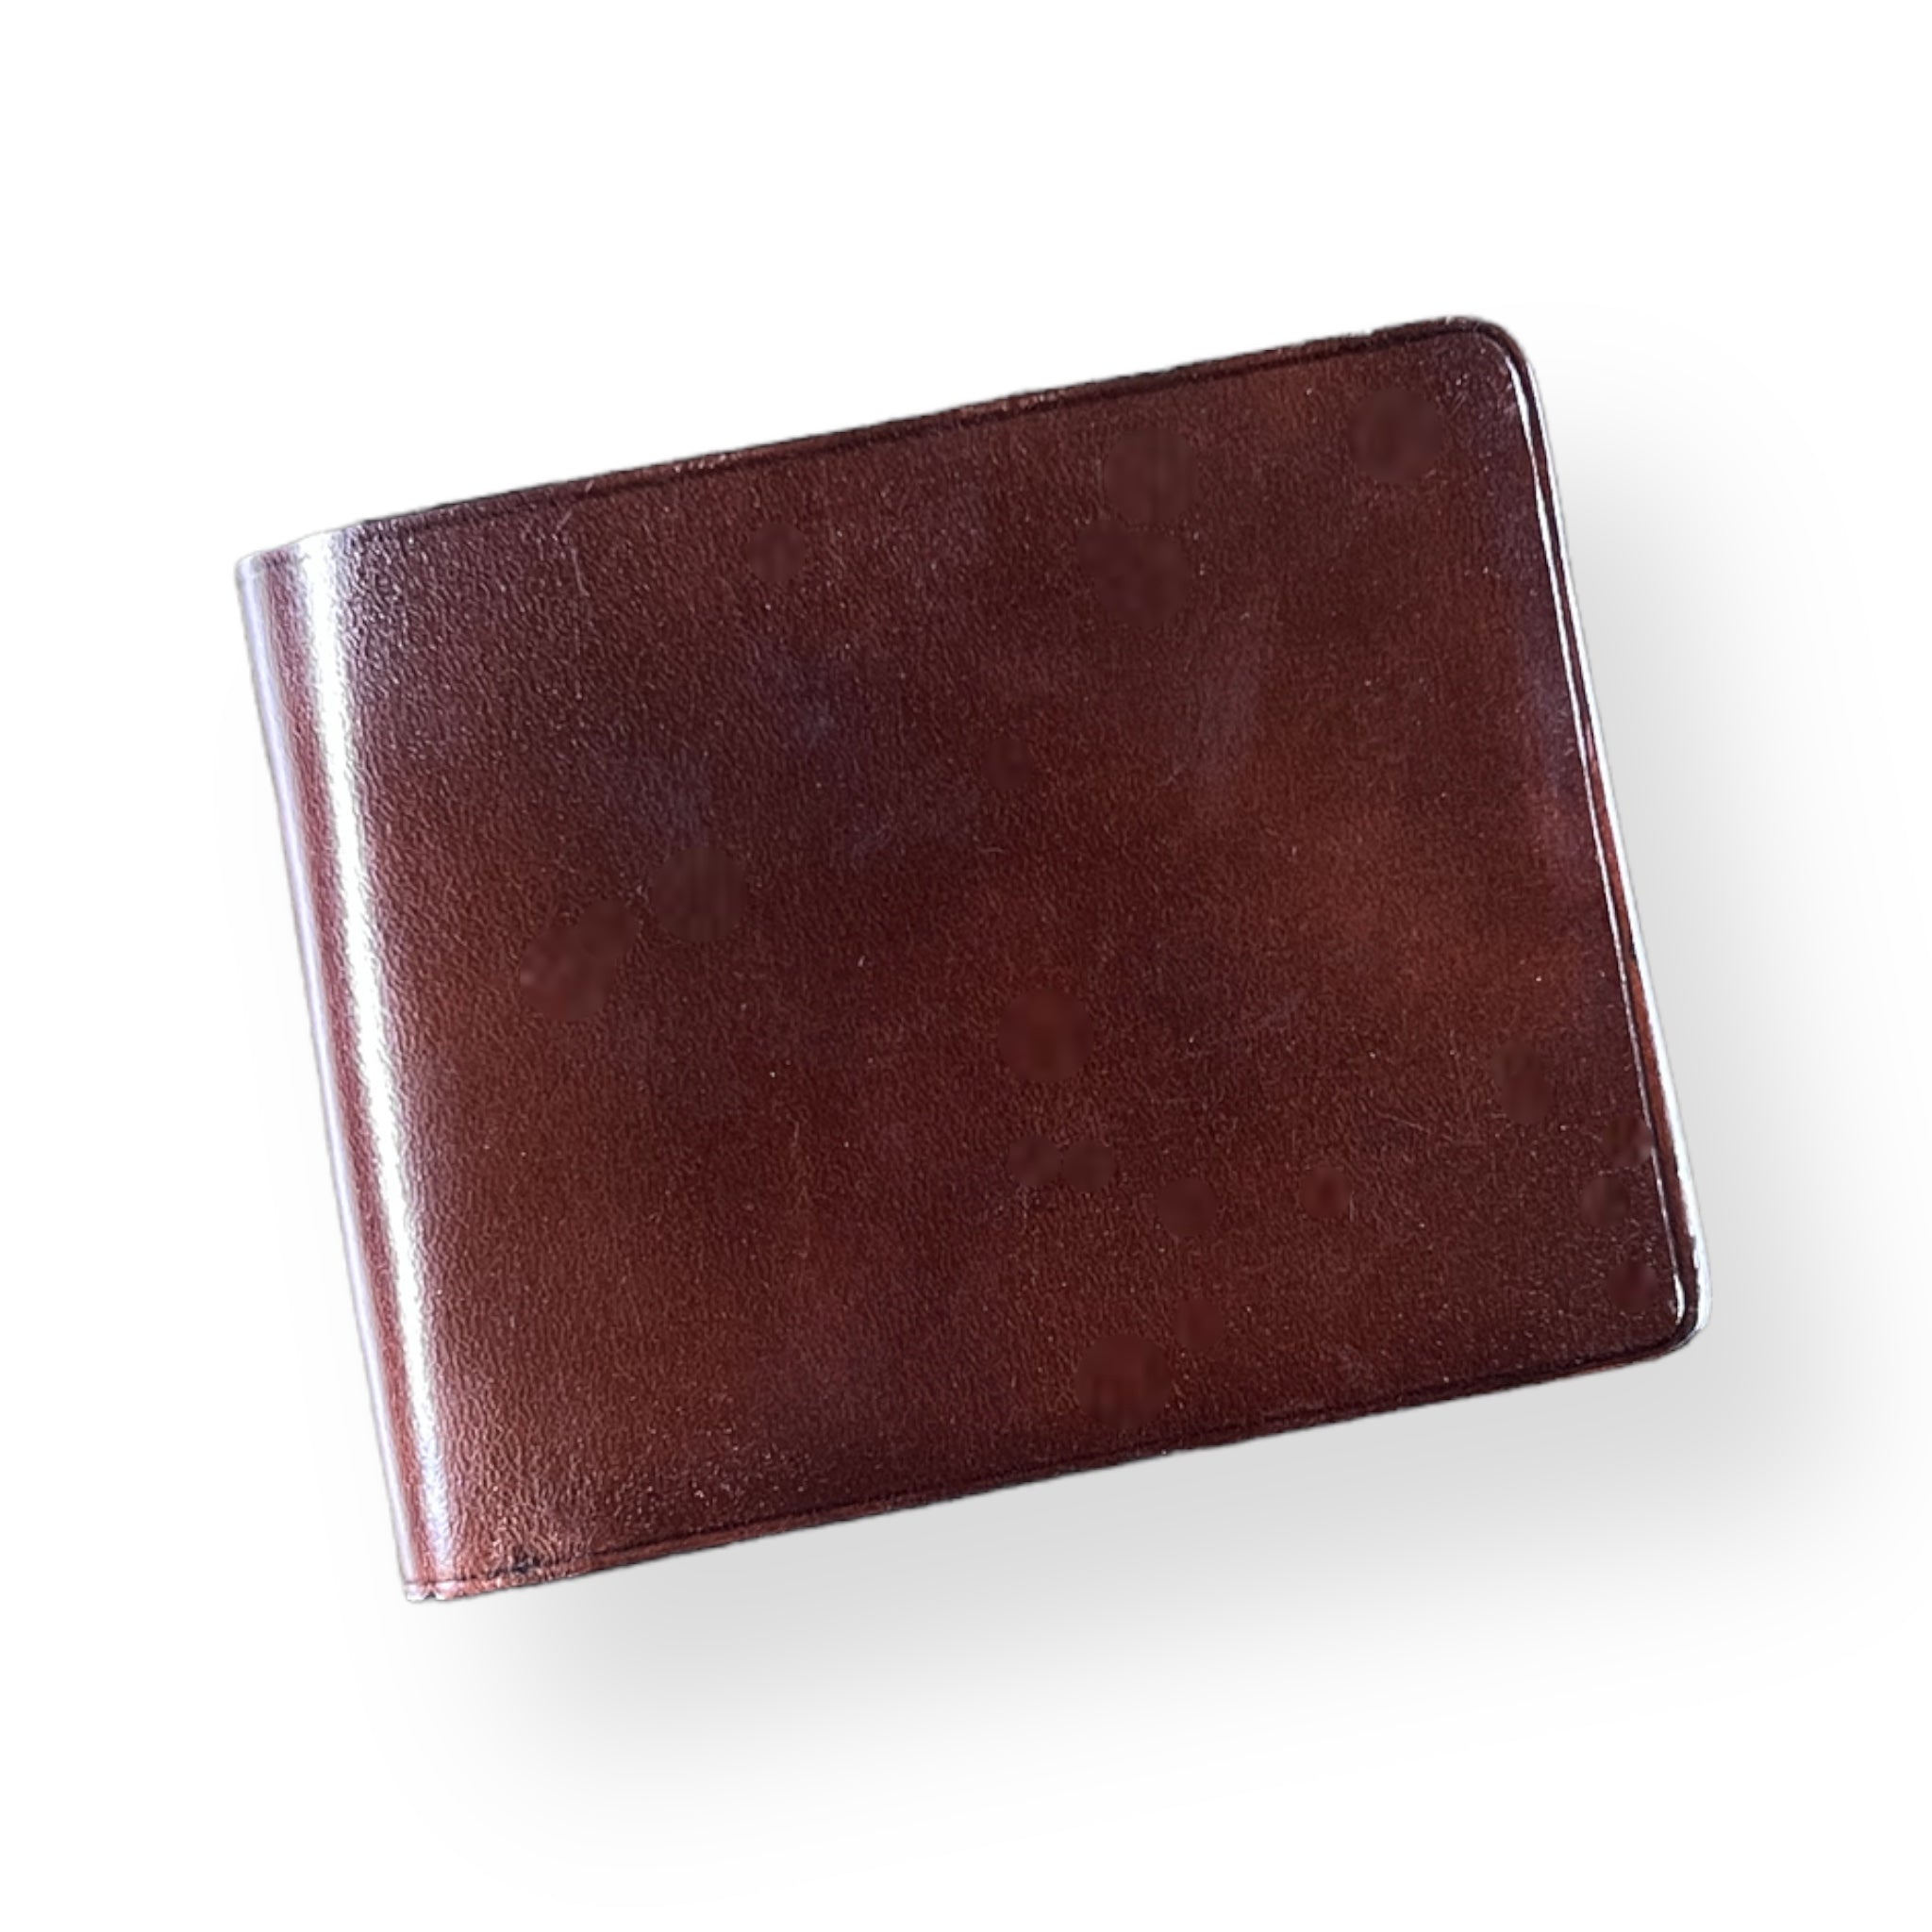 Il Bussetto Bi-fold Wallet with Coin Pocket dark brown 02